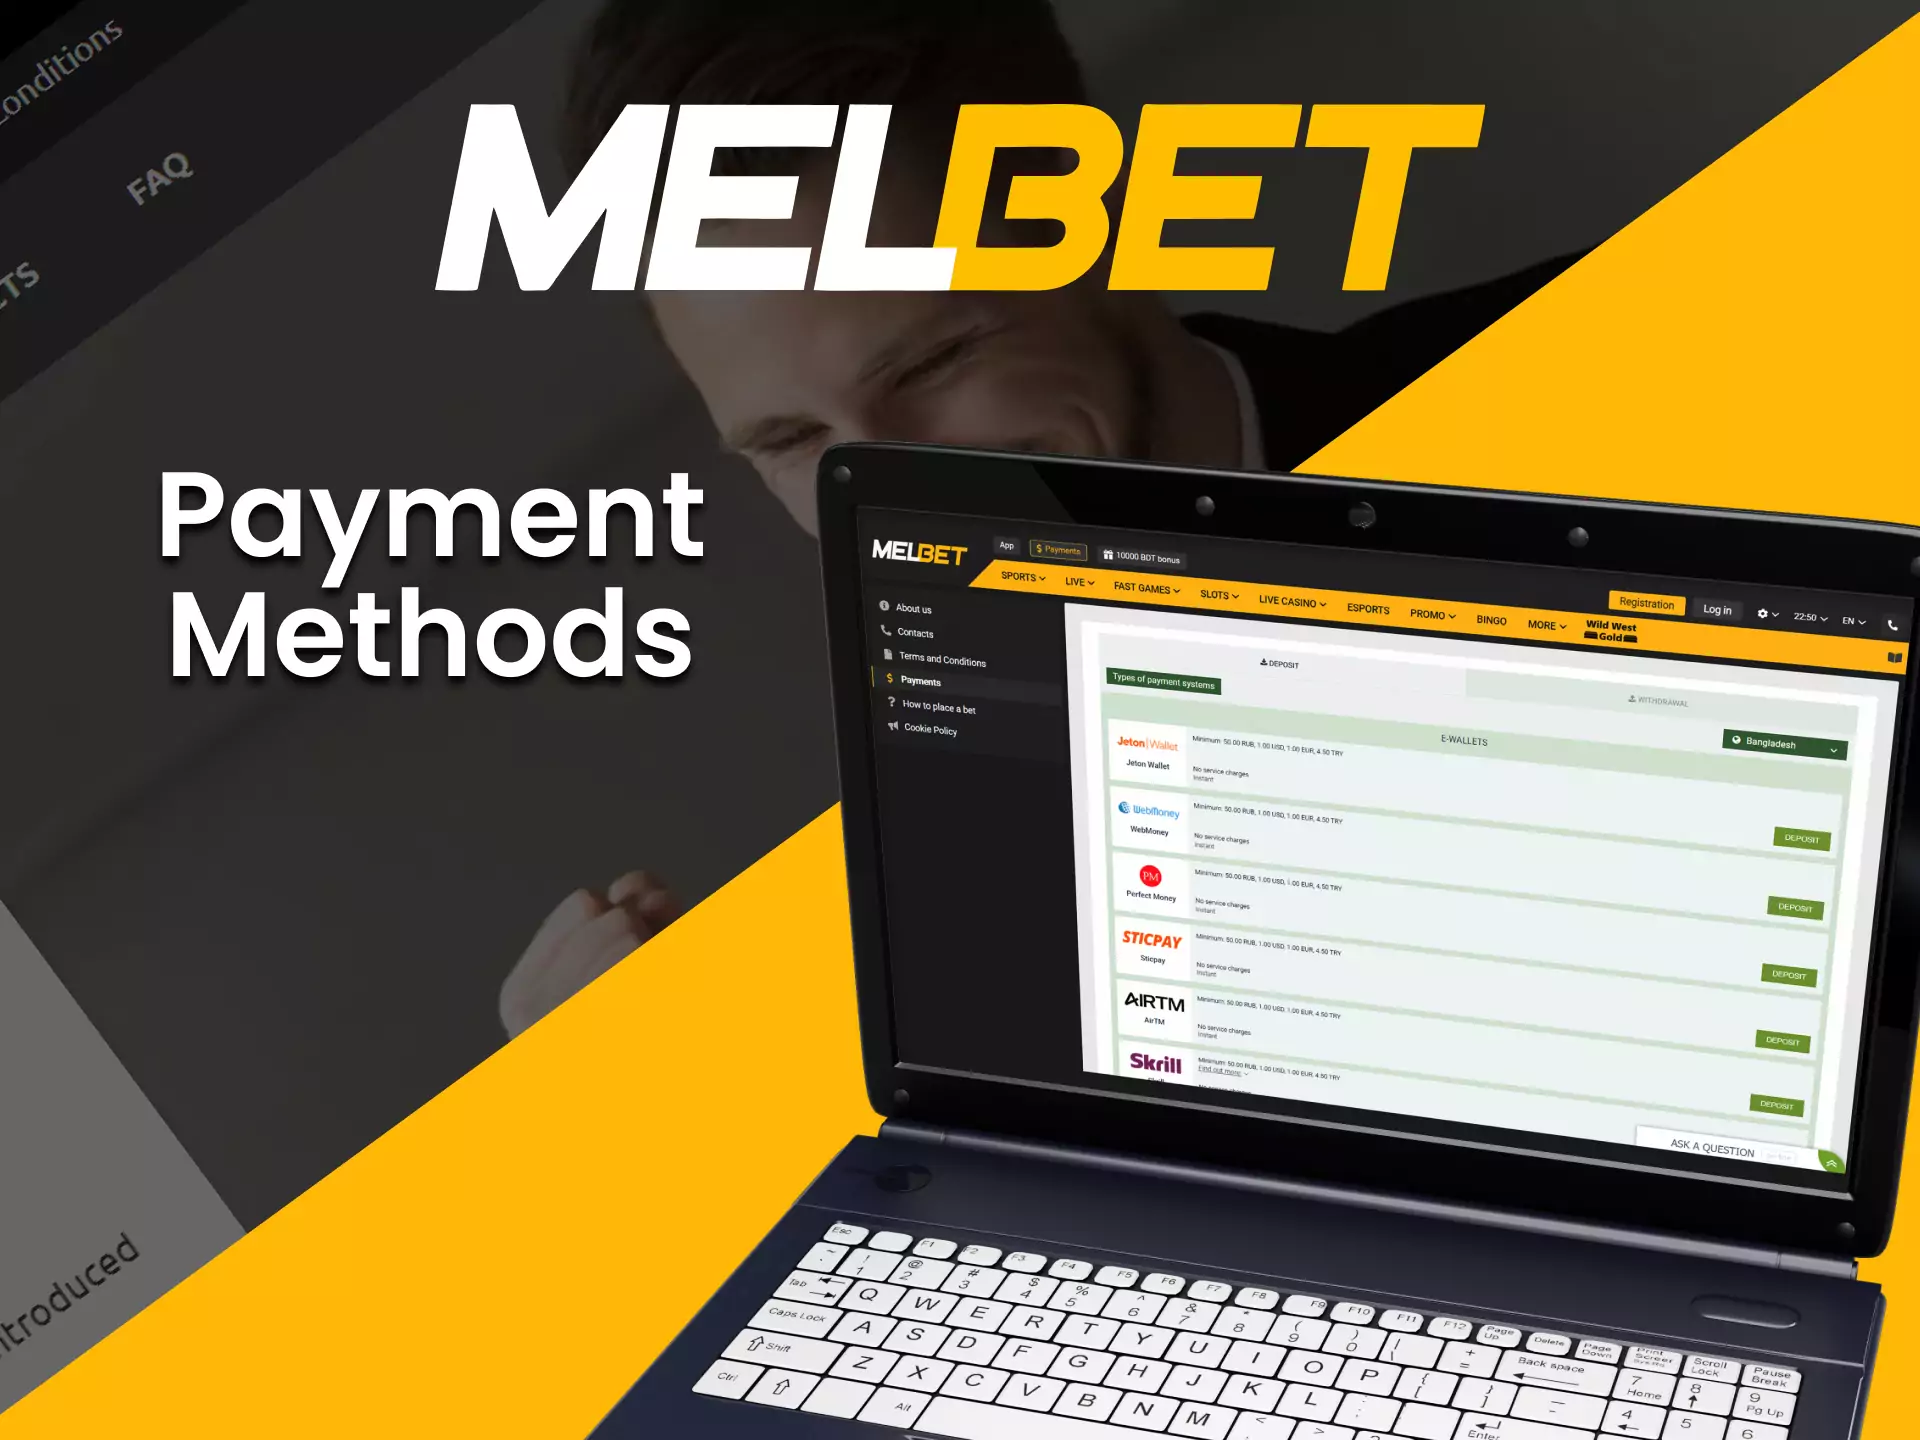 The Melbet affiliate program uses the most common payment methods in India.